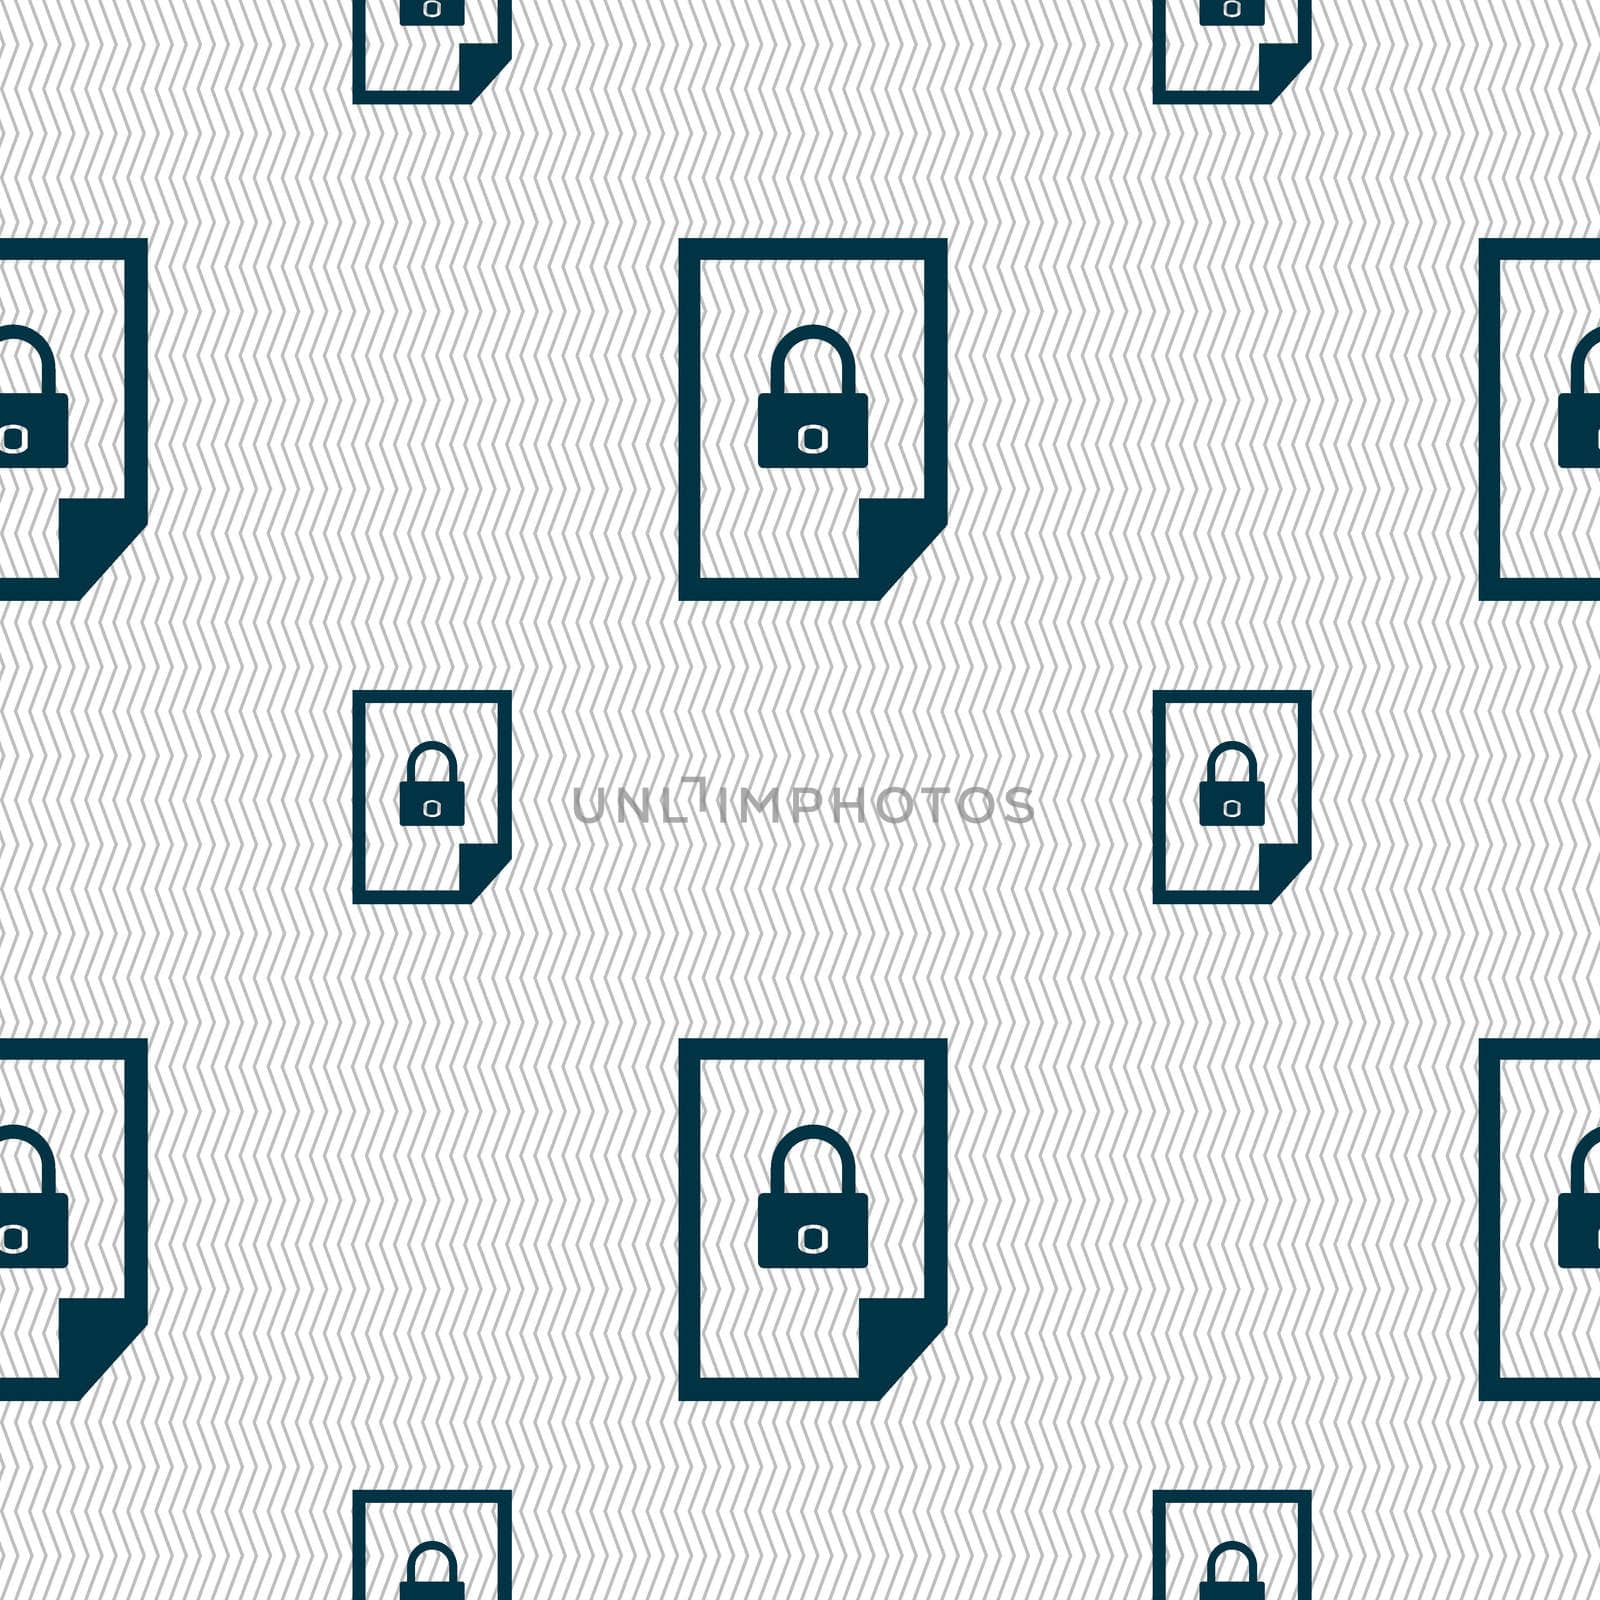 File locked icon sign. Seamless pattern with geometric texture. illustration